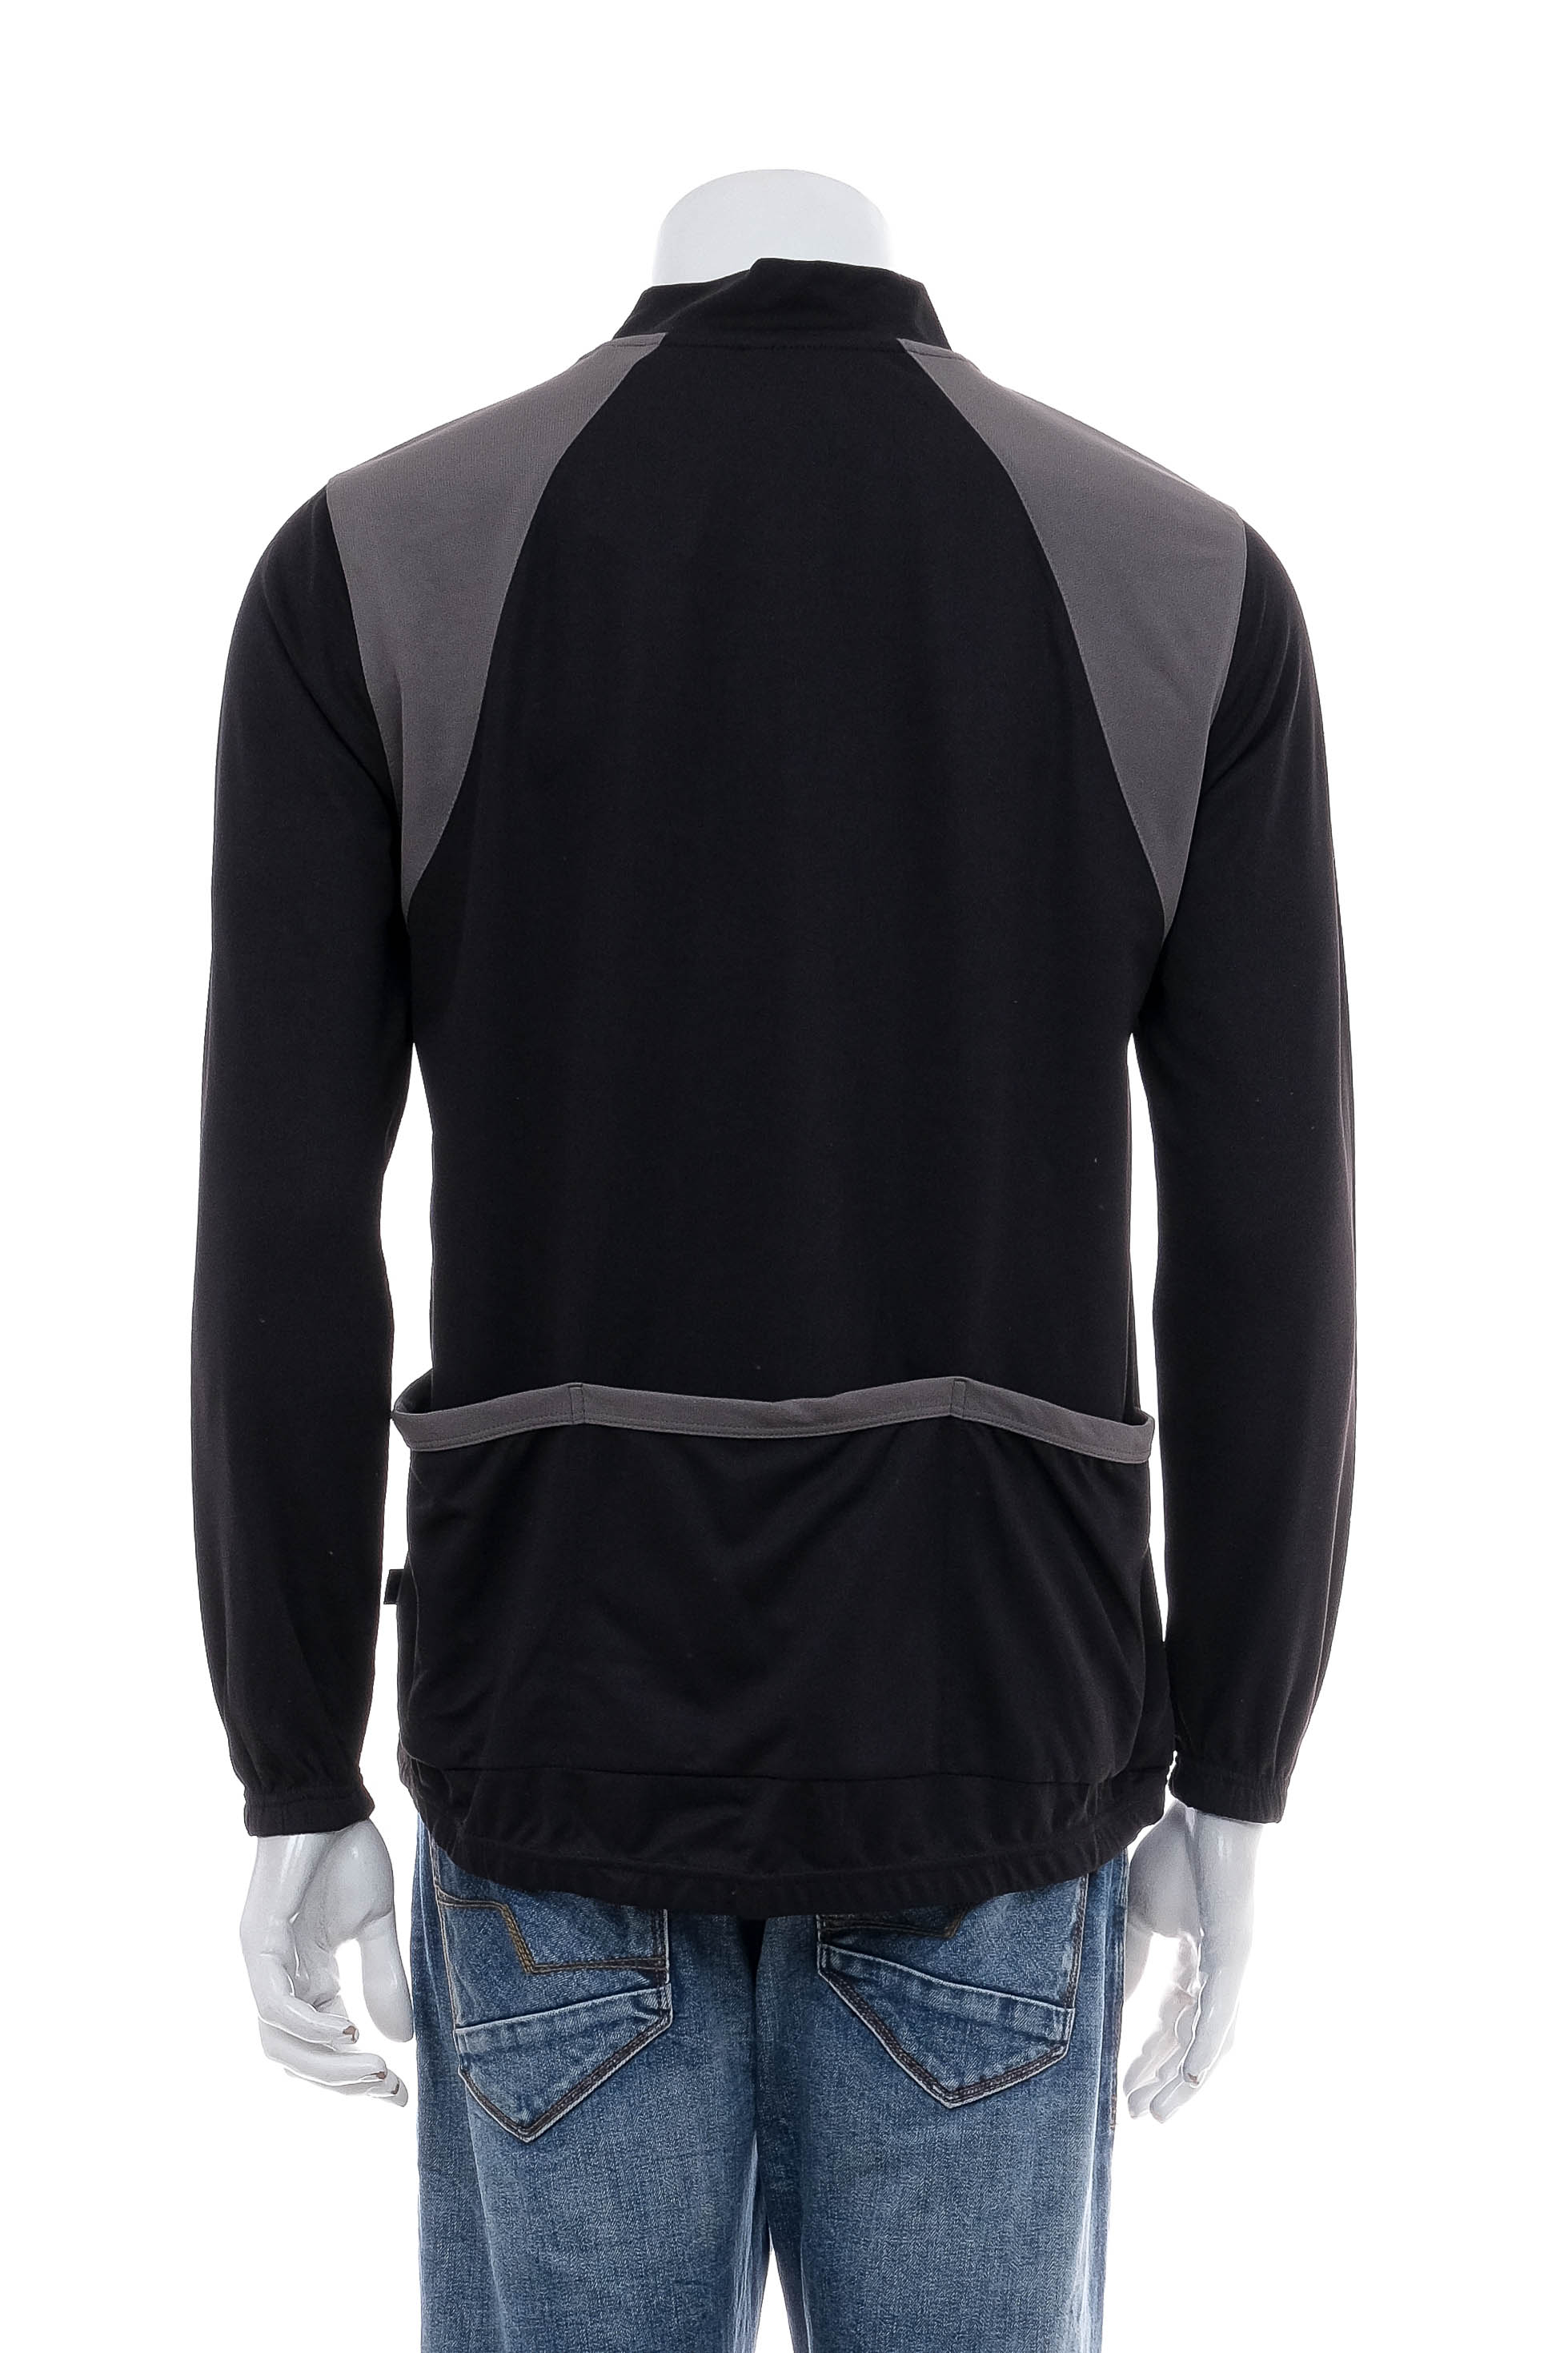 Men's blouse for cycling - C movement - 1